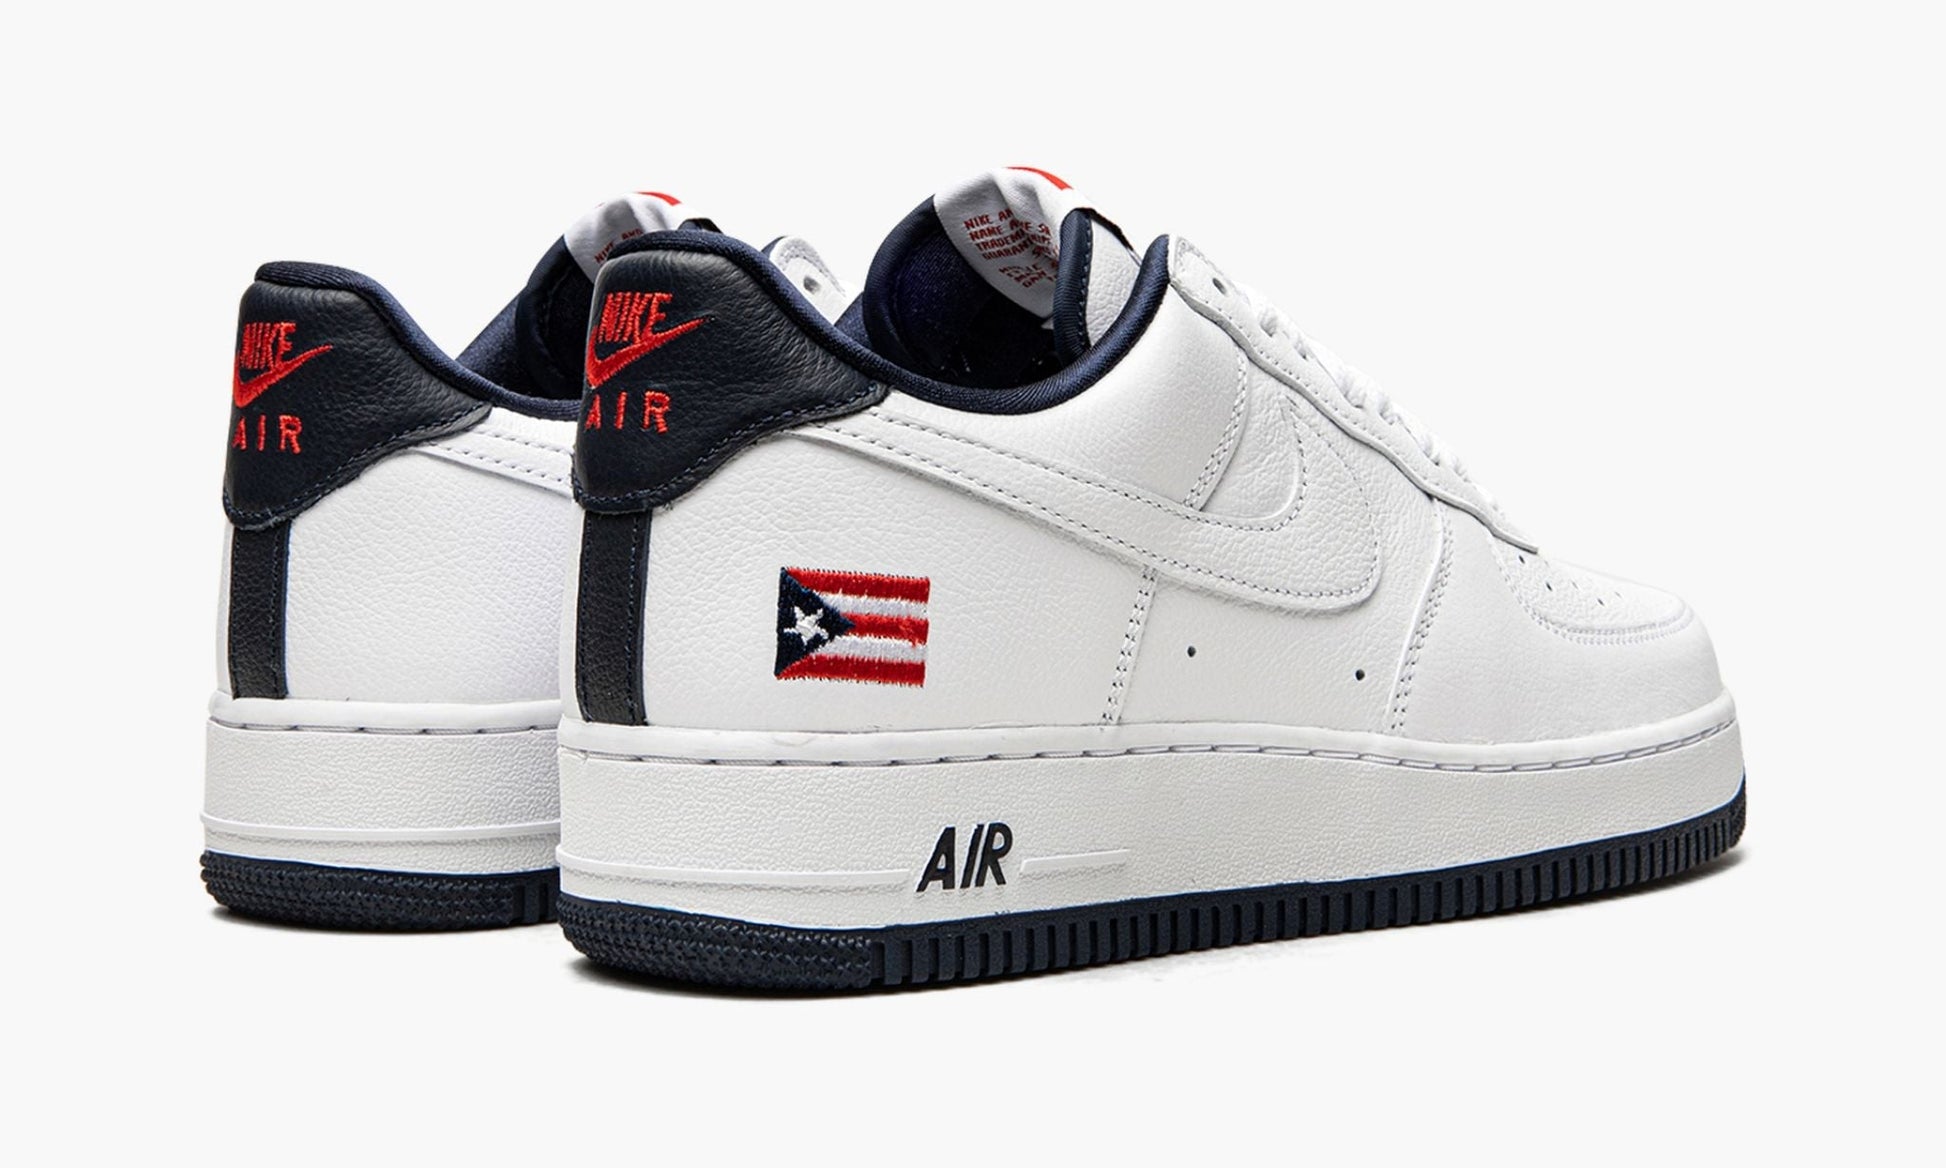 Air Force 1 Low "Puerto Rico"